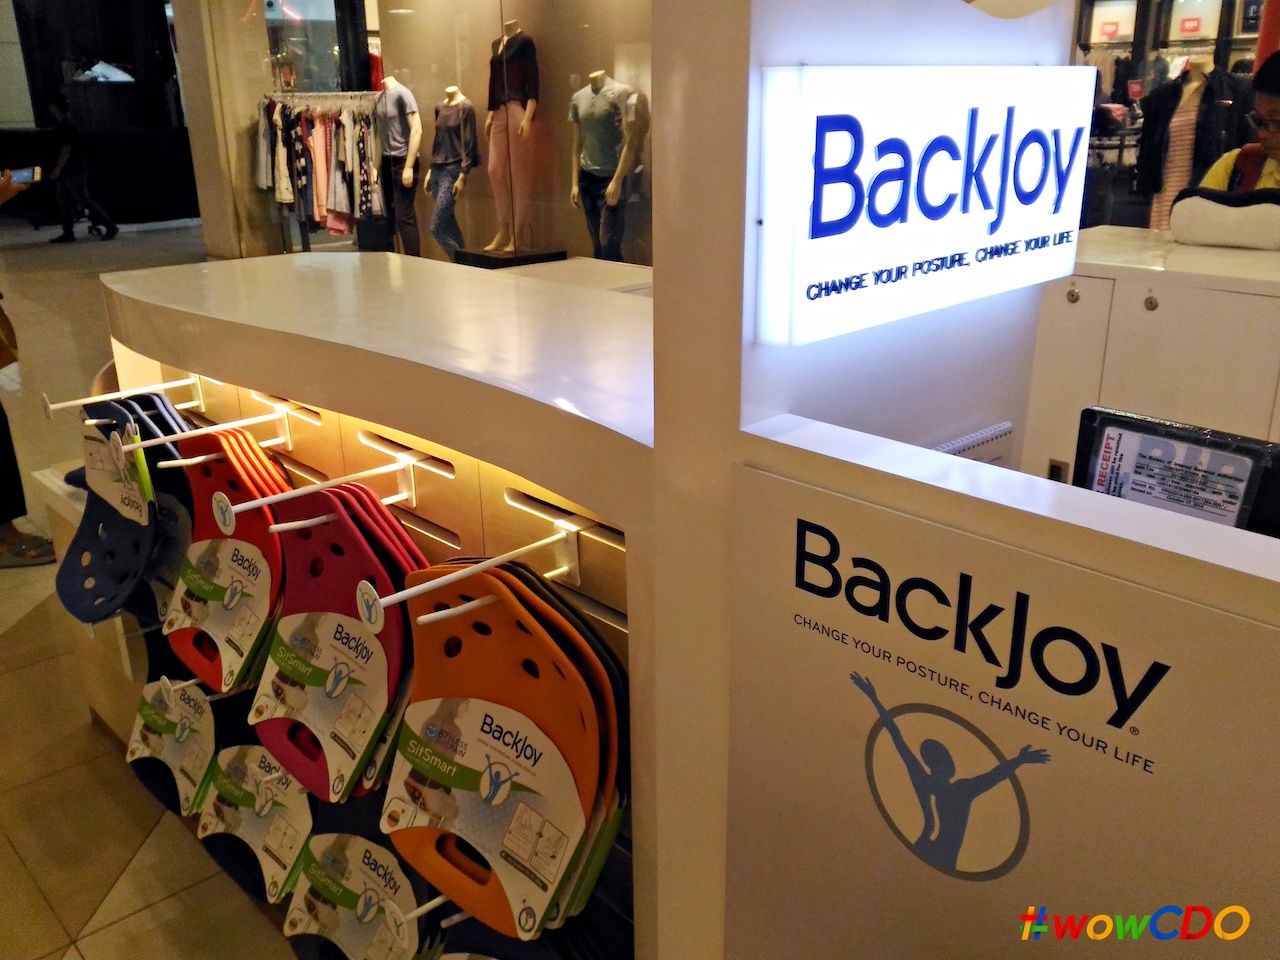 Improve Posture and Eliminate Back Pain with BackJoy in CDO